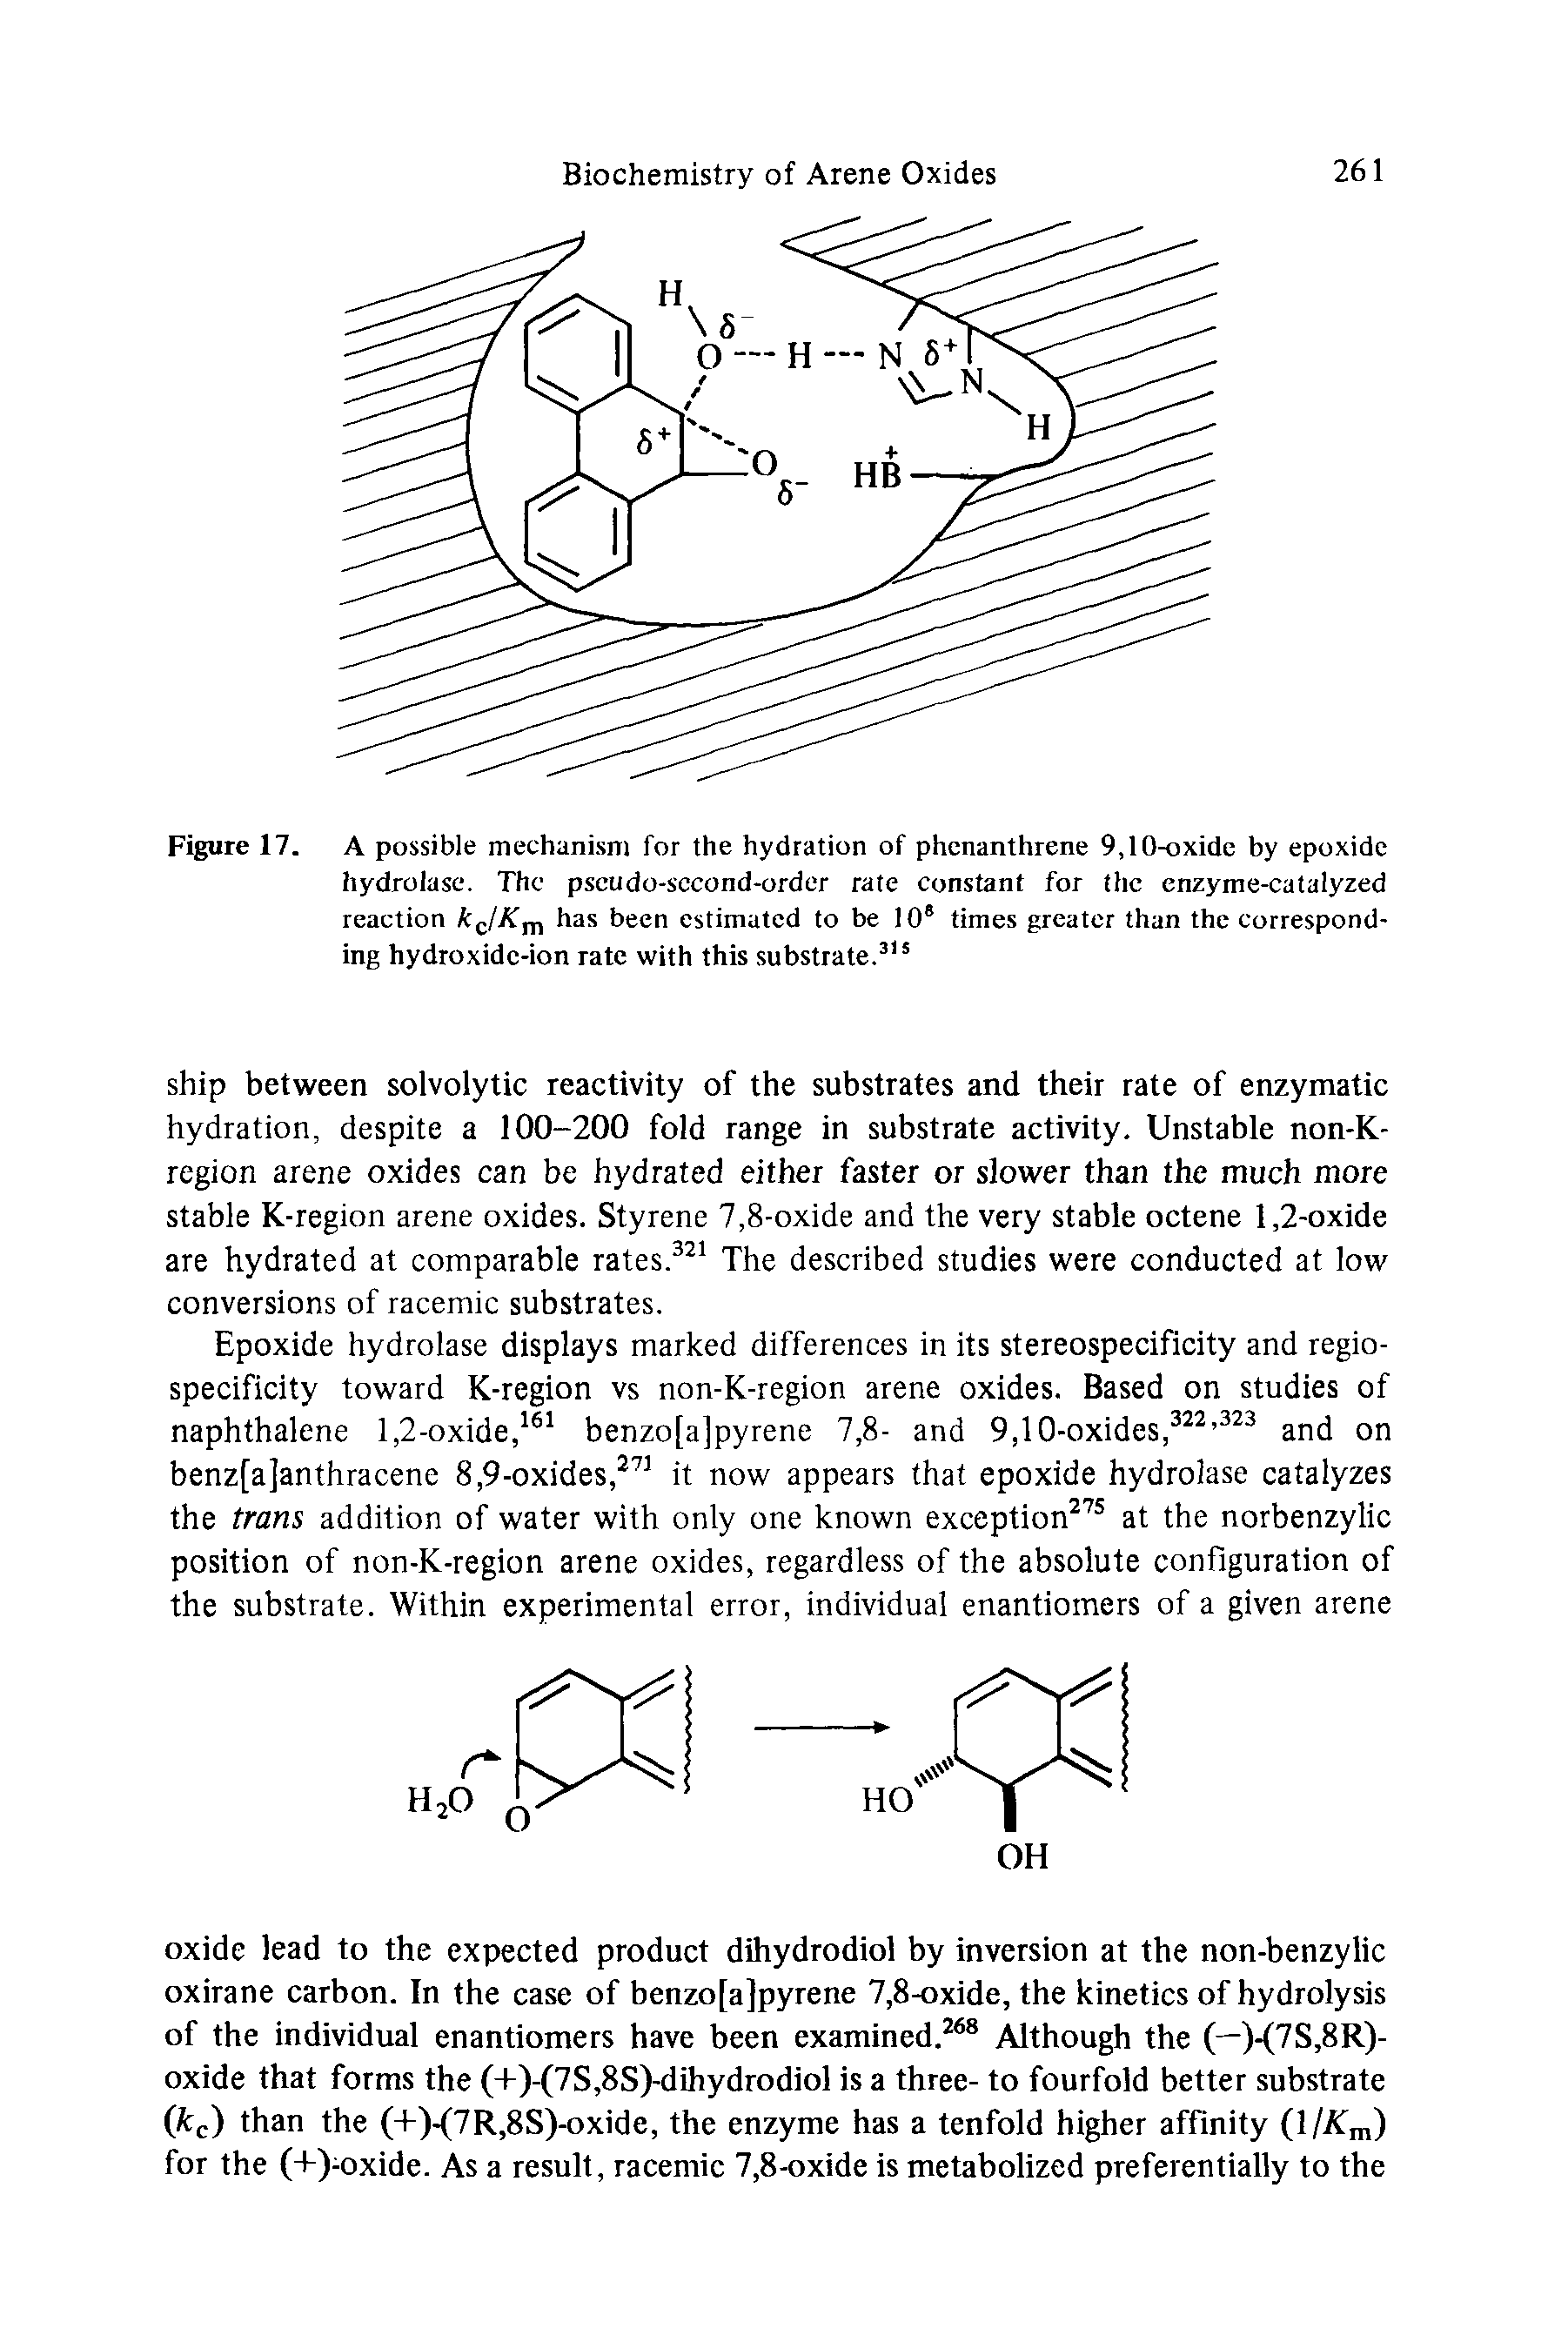 Figure 17. A possible mechanism for the hydration of phcnanthrene 9,10-oxidc by epoxide hydrolase. The pscudo-sccond-order rate constant for the enzyme-catalyzed reaction has been estimated to be 10 times greater than the correspond-...